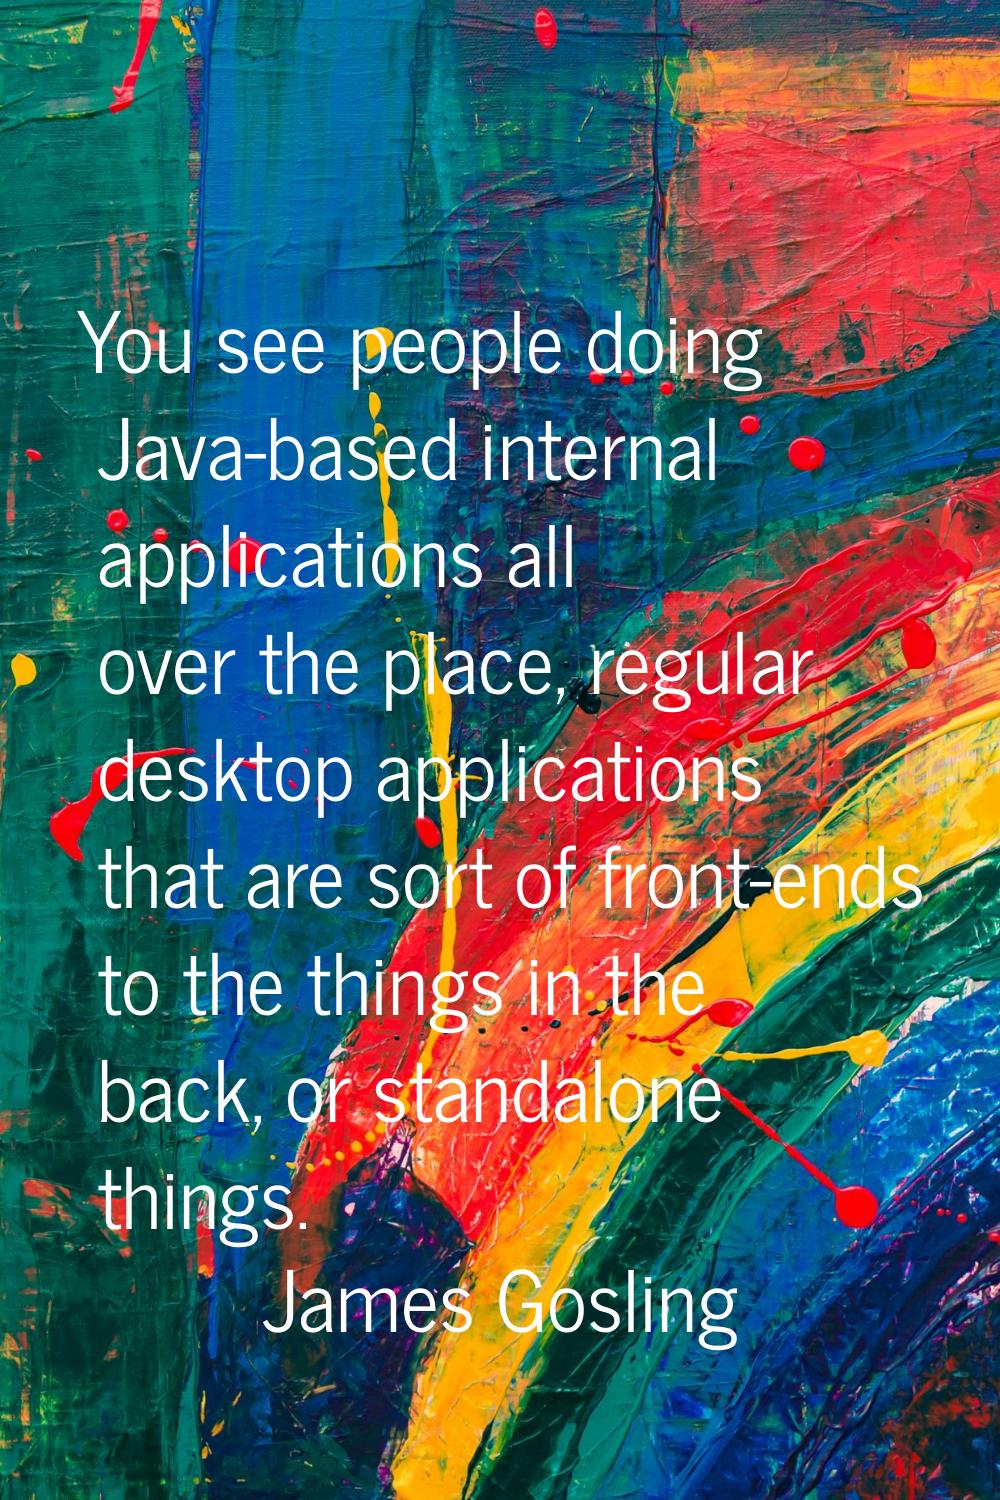 You see people doing Java-based internal applications all over the place, regular desktop applicati